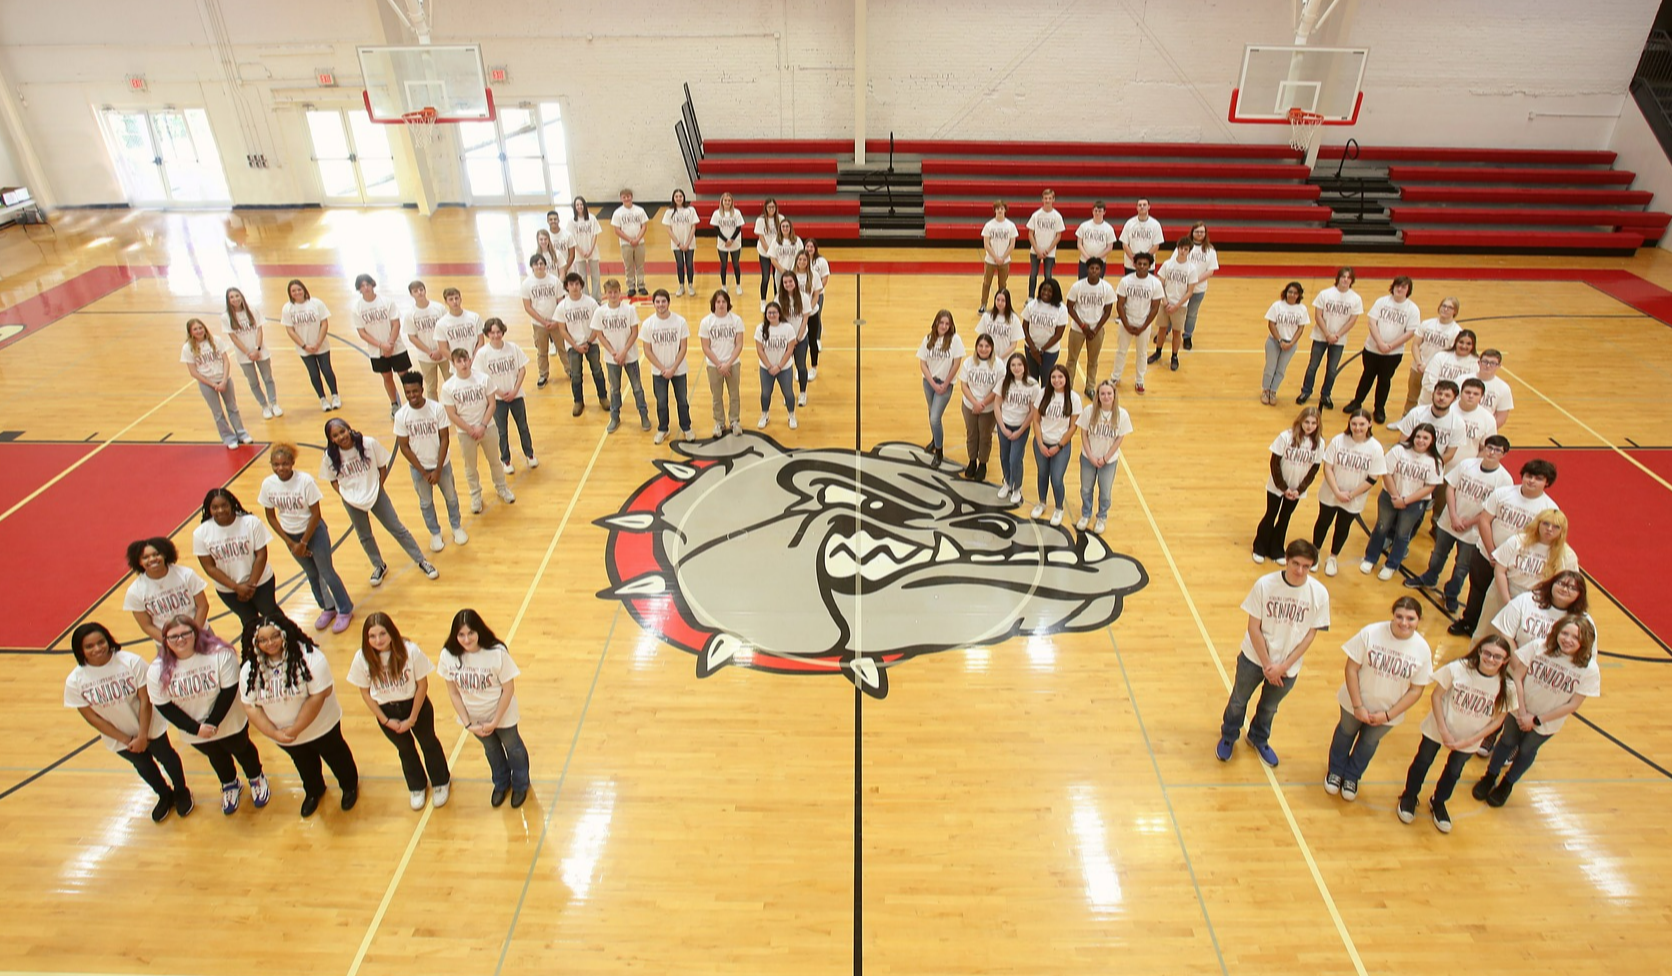 Students in the class of 2023 pose in white t-shirts and for me the number 2022